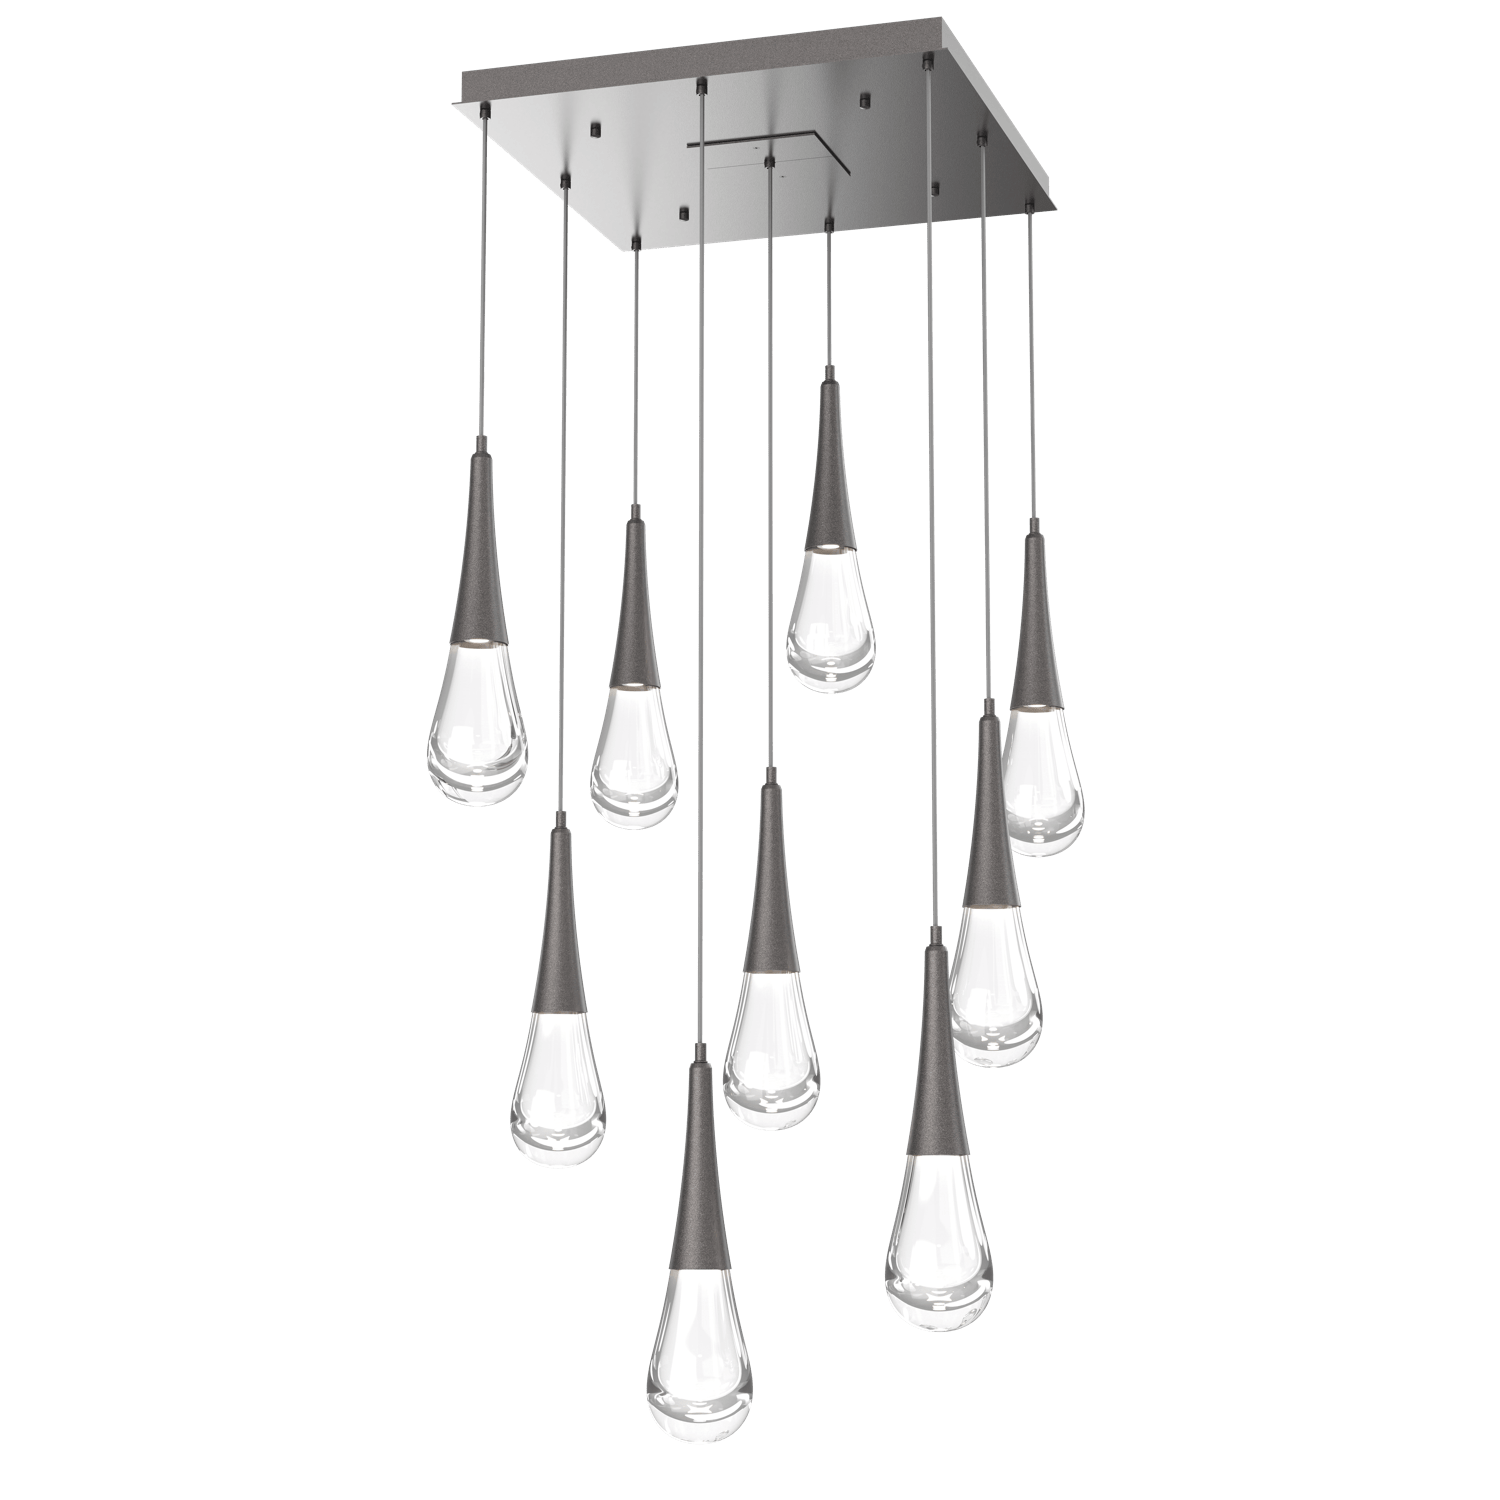 CHB0078-09-GP-Hammerton-Studio-Raindrop-9-light-square-pendant-chandelier-with-graphite-finish-and-clear-blown-glass-shades-and-LED-lamping